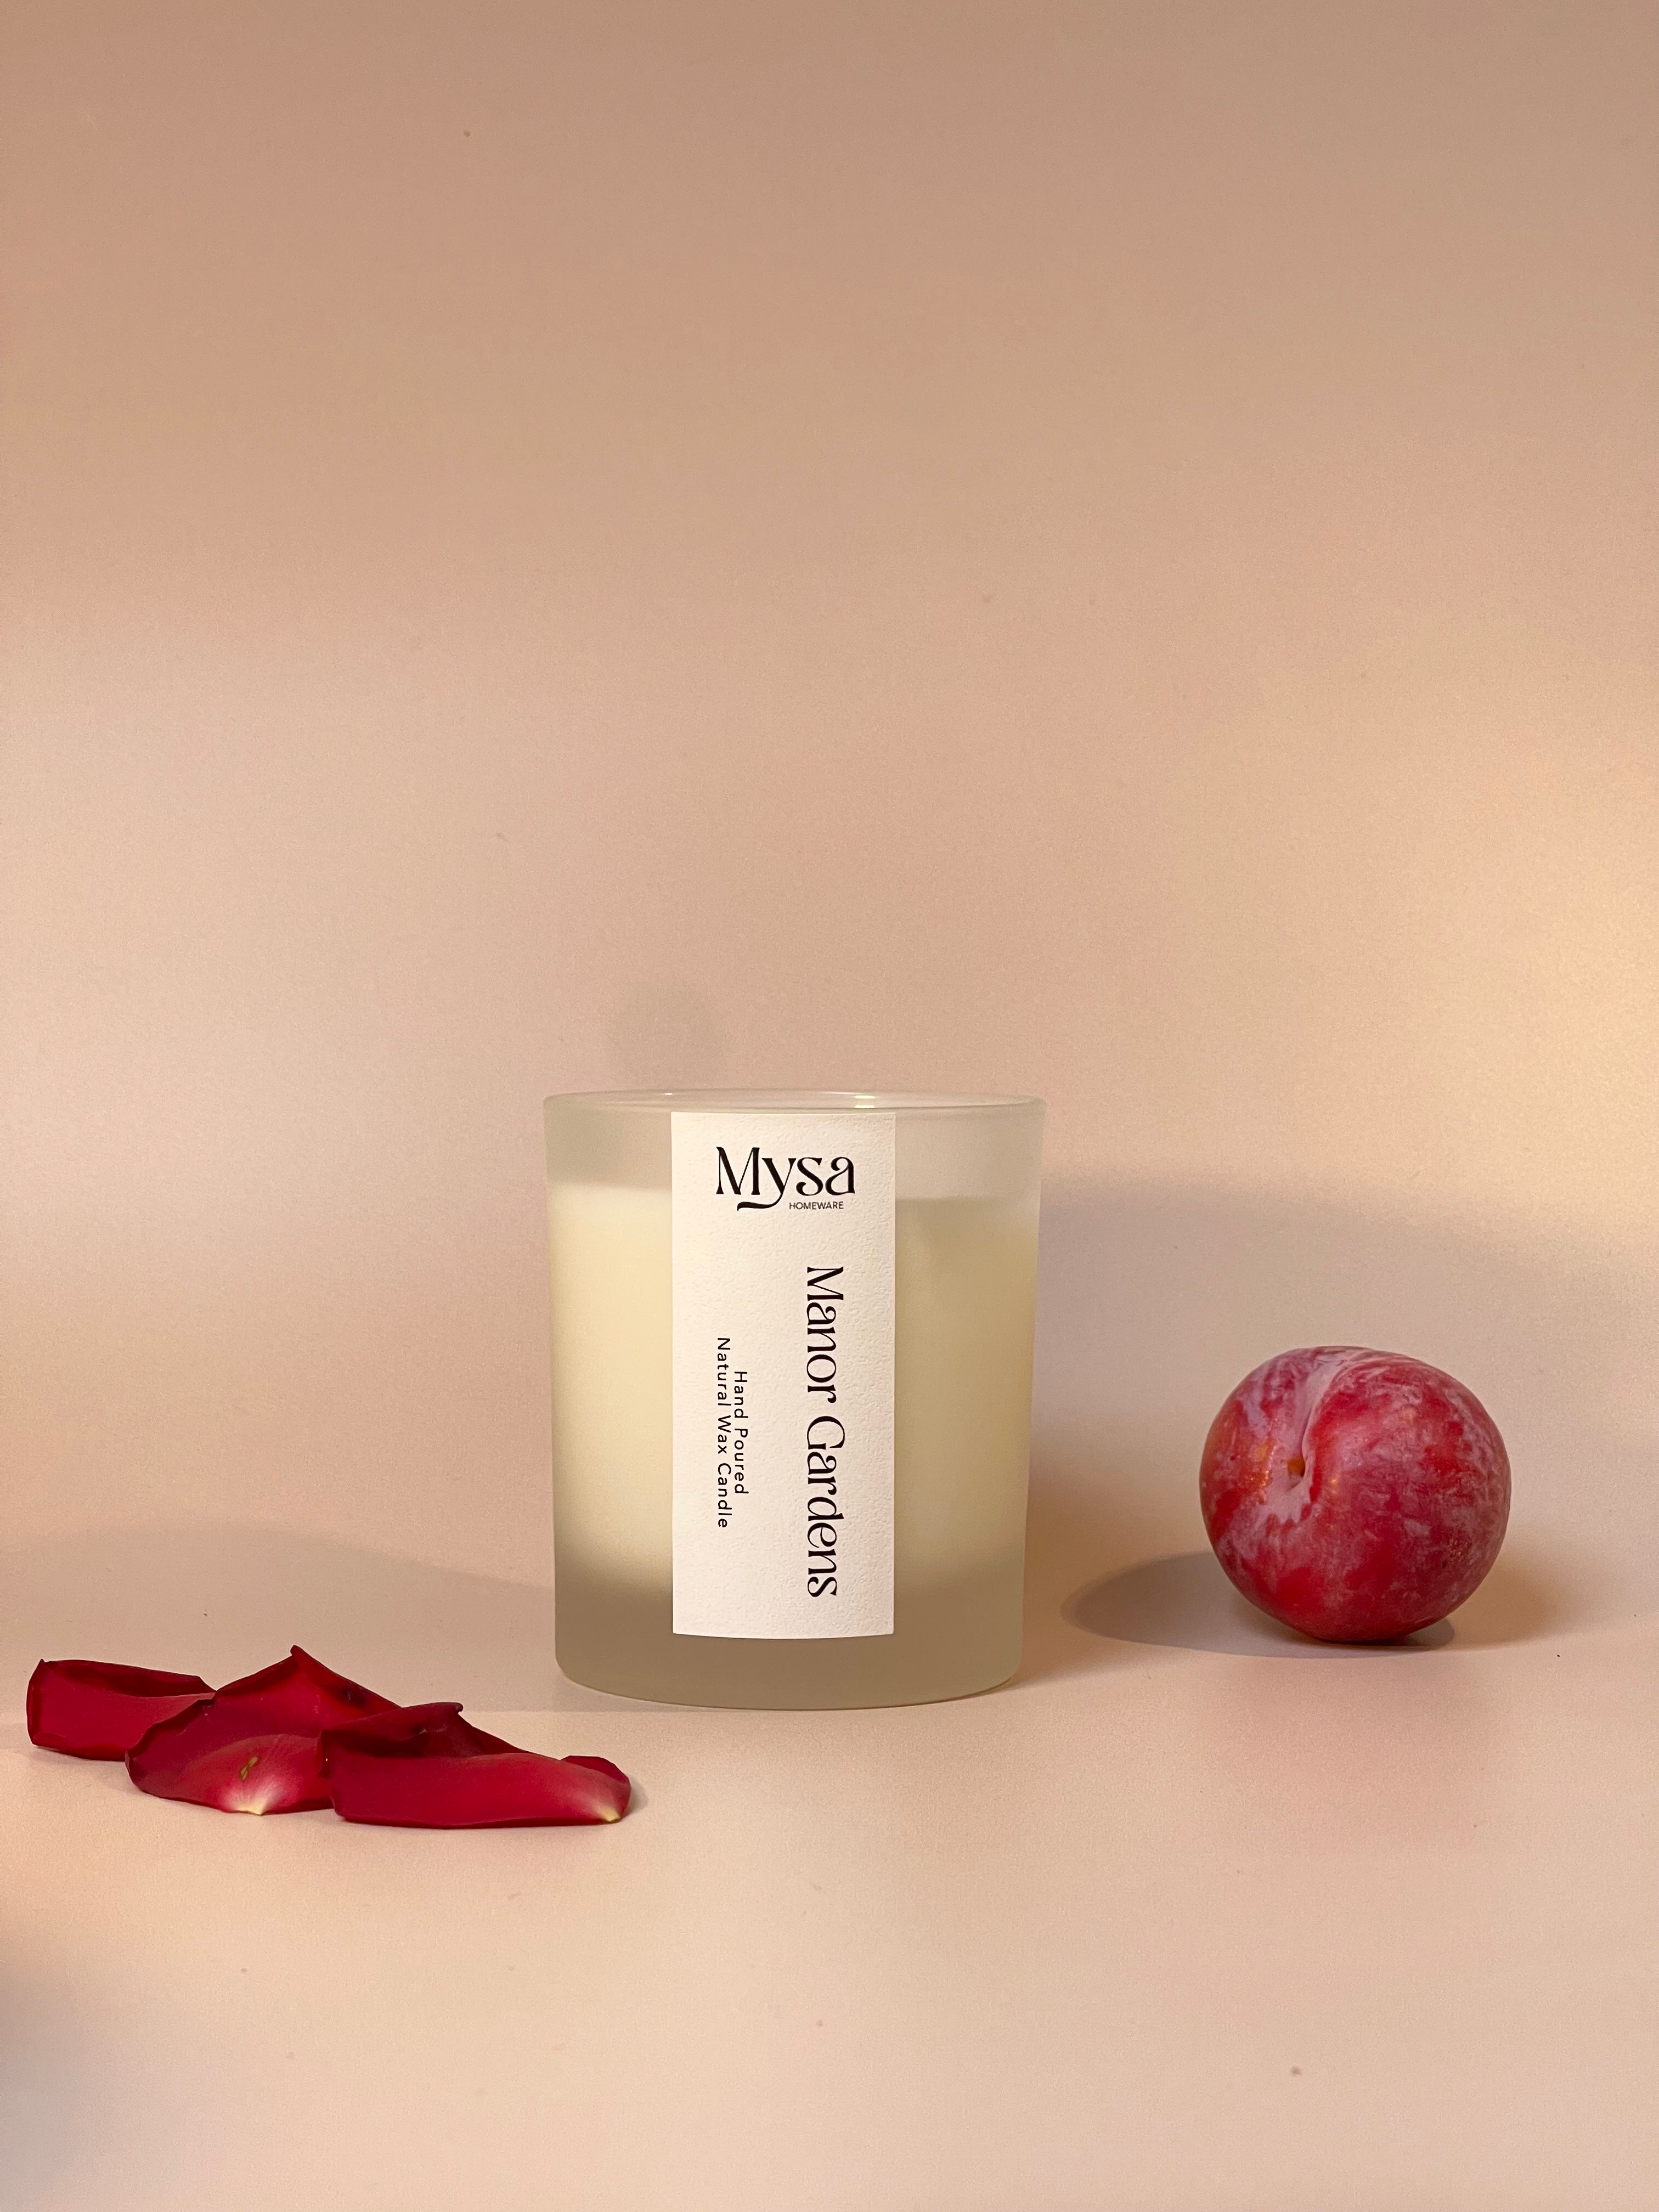 Manor Gardens luxury scented candle in gift box, with natural wax and damson plum, rose &amp; patchouli fragrance.